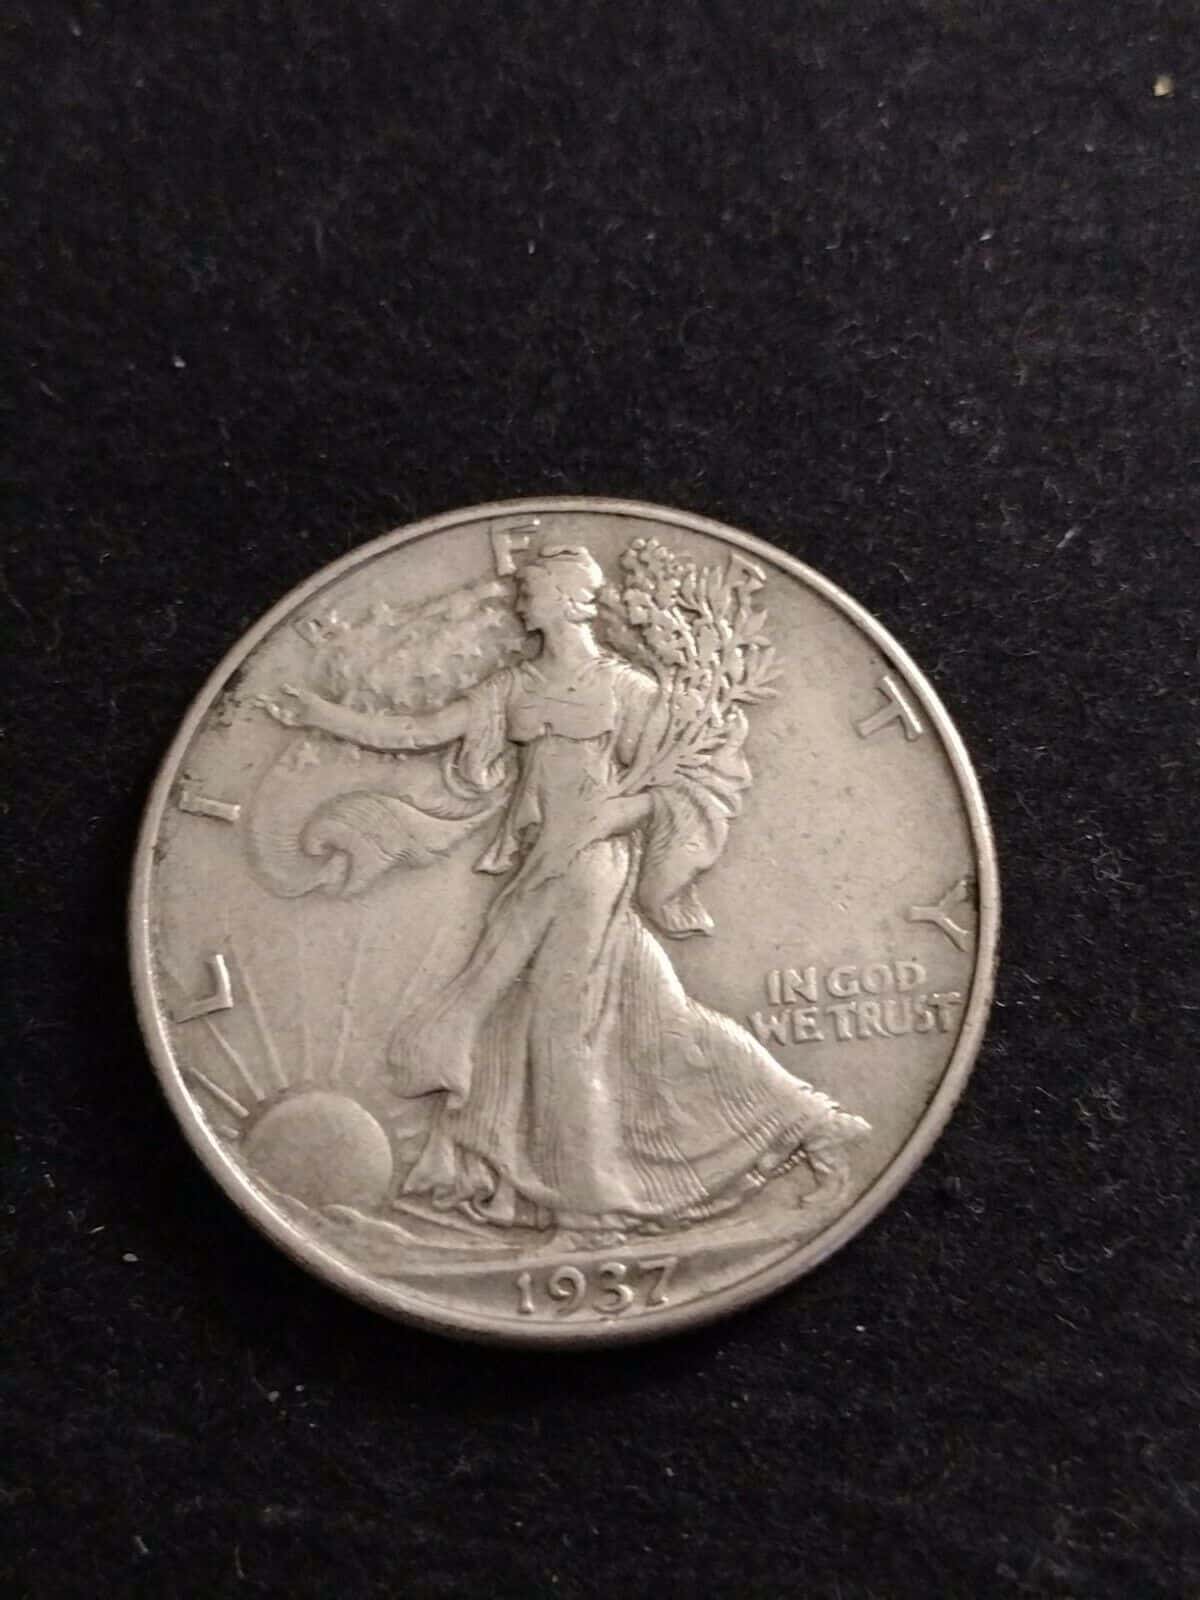 Factors that Influence the Value of the 1937 Half Dollar